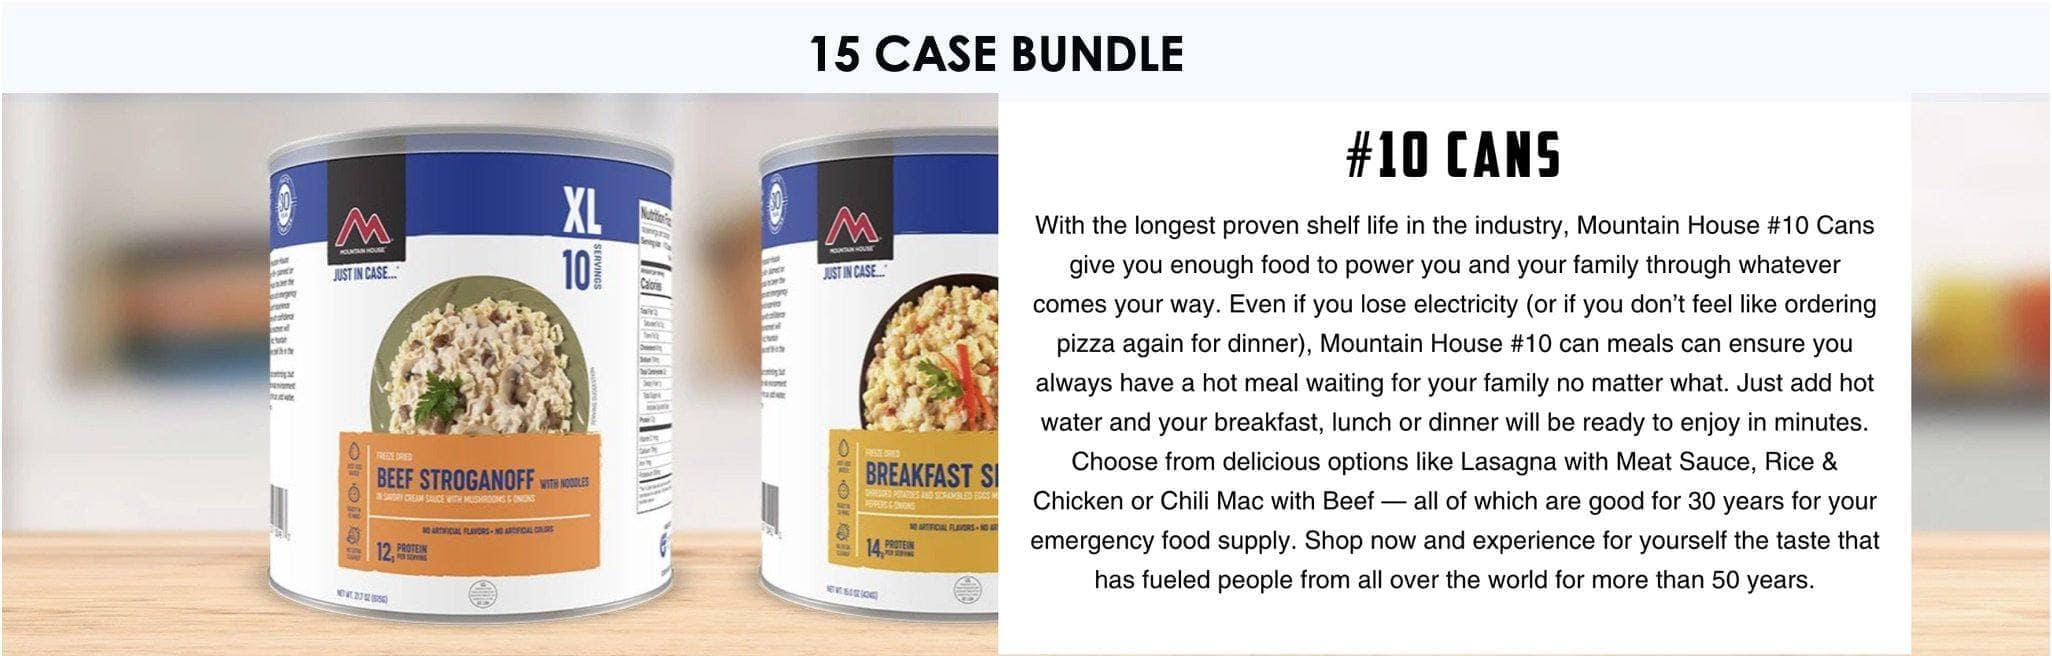 Image of 15 Case Package - Mountain House Cans